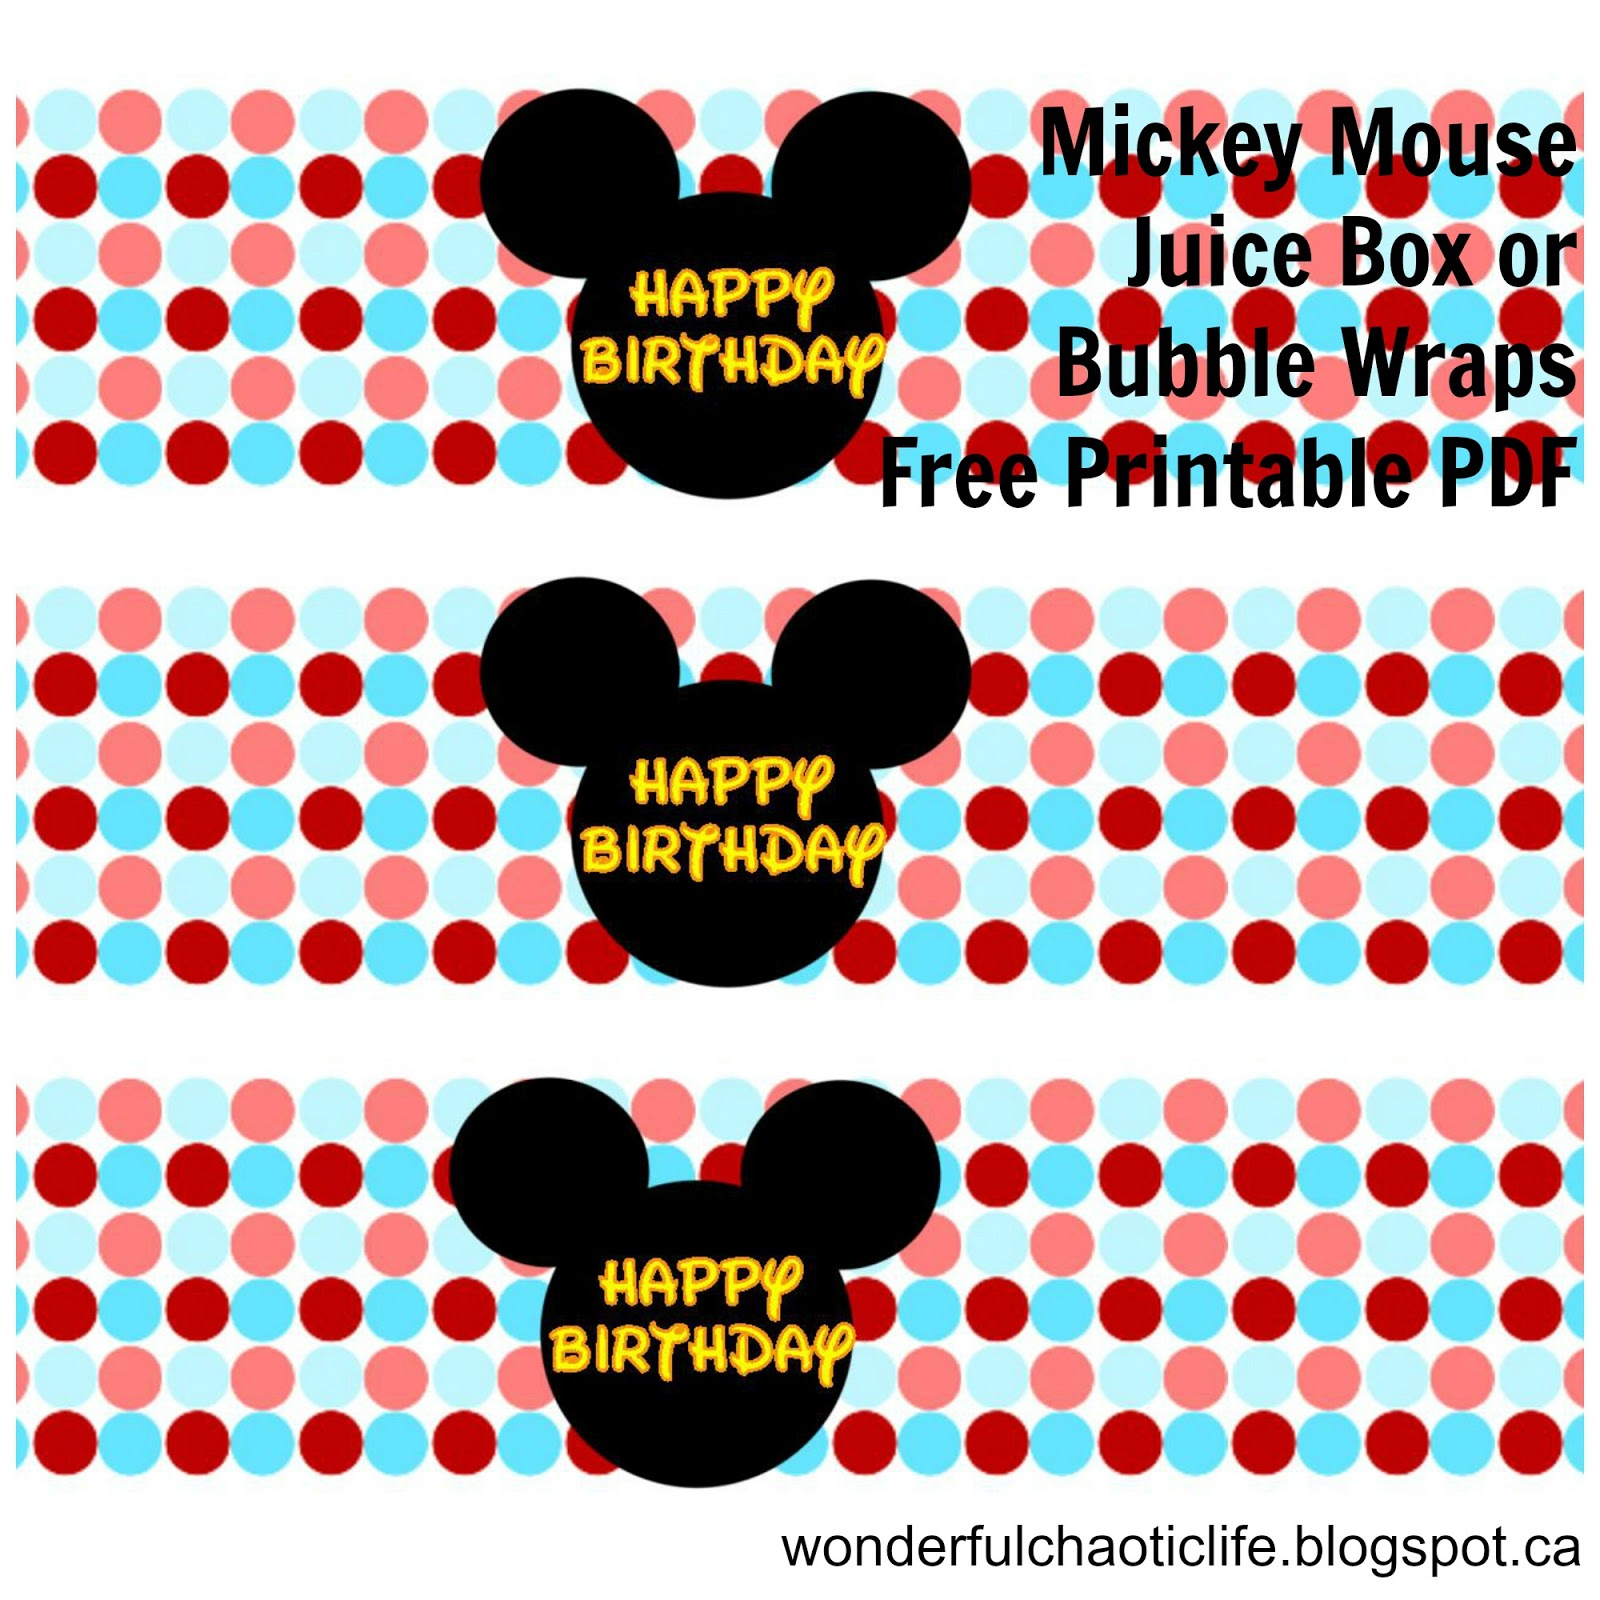 It's My Wonderful Chaotic Life Mickey Mouse Birthday Party FREE PRINTABLES